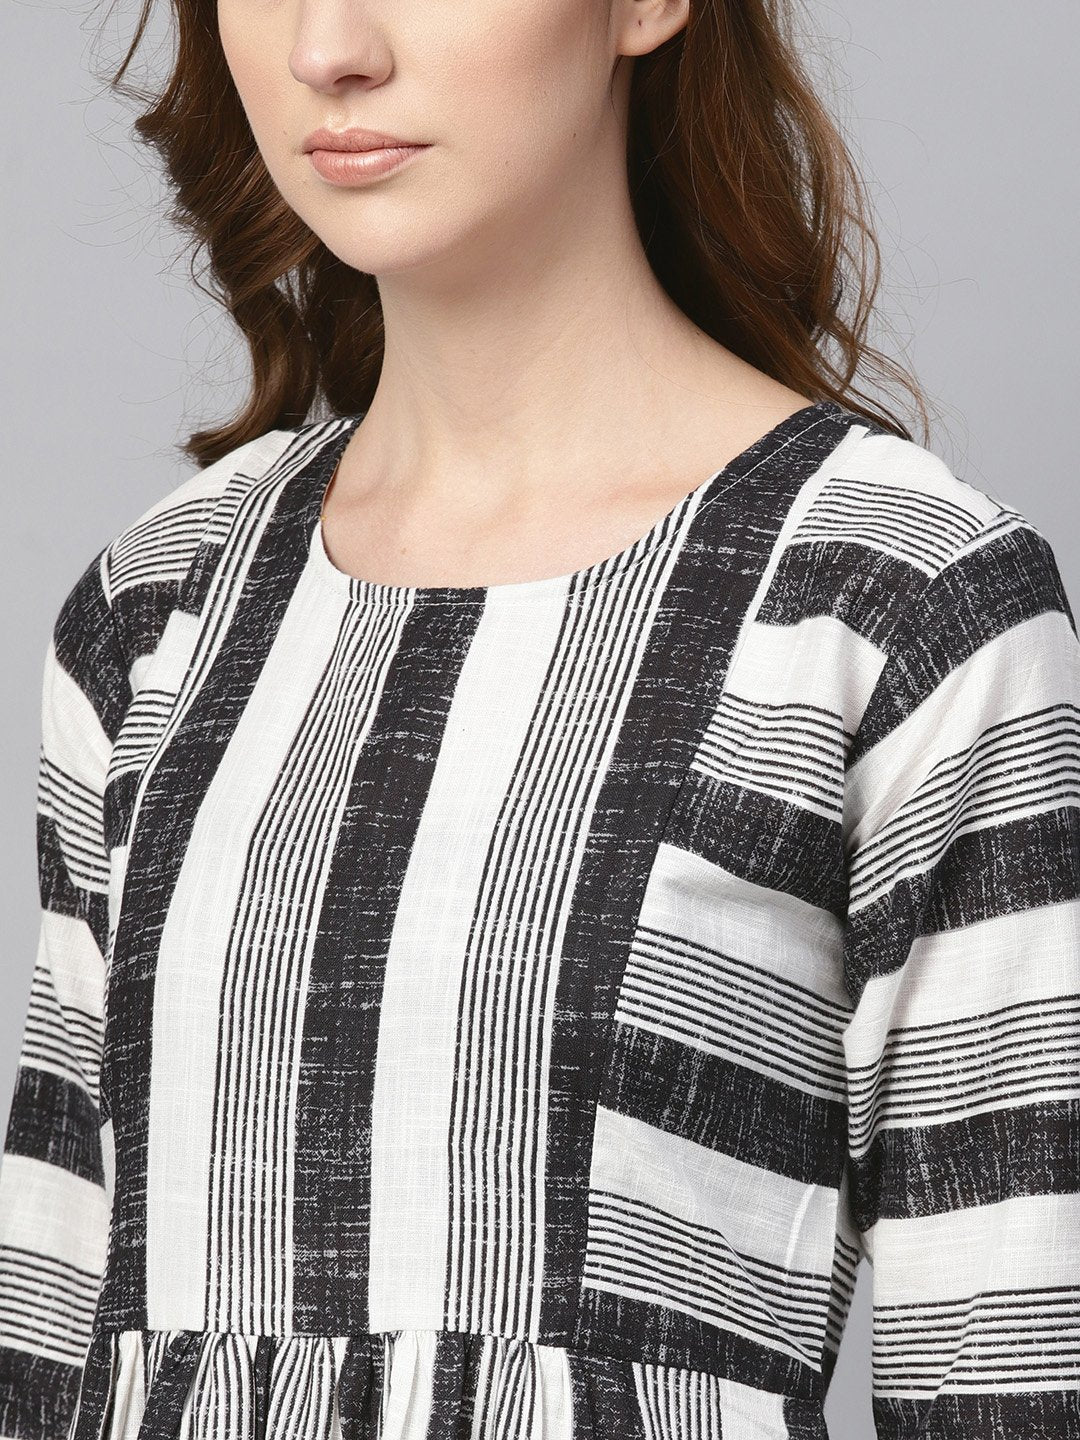 Women's Black & Wihte Stripped Dress With Round Neck & 3/4 Sleeves - Nayo Clothing